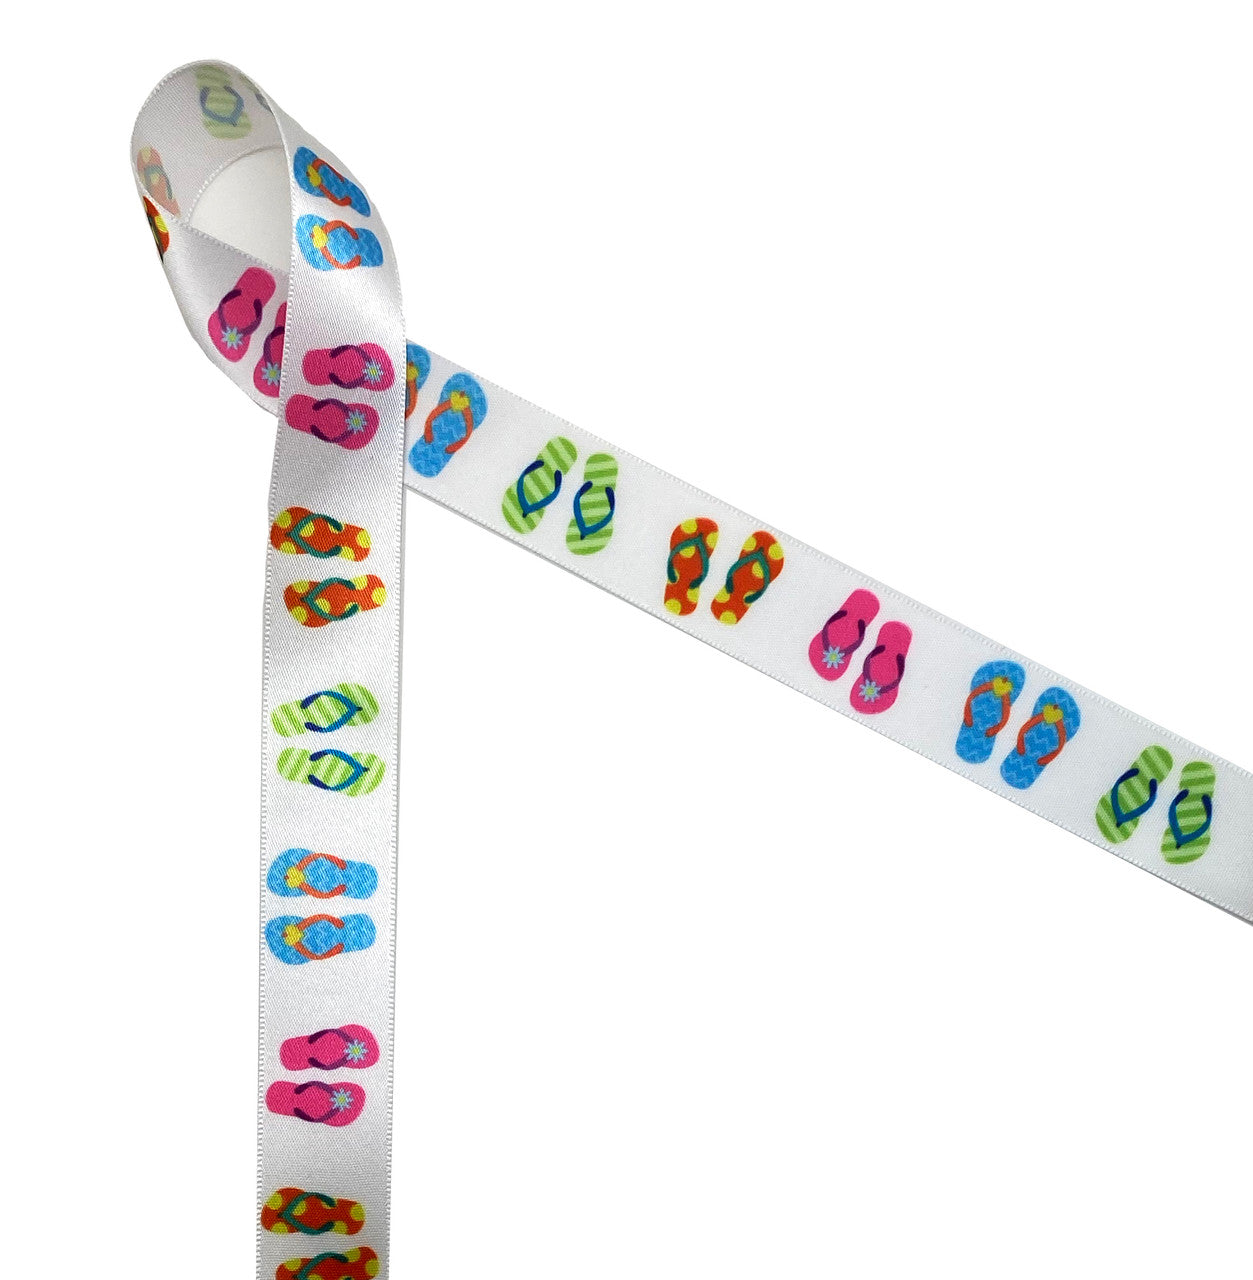 Flip flops on 7/8" Single Face Satin ribbon is sure to make a splash at your next beach or pool party!